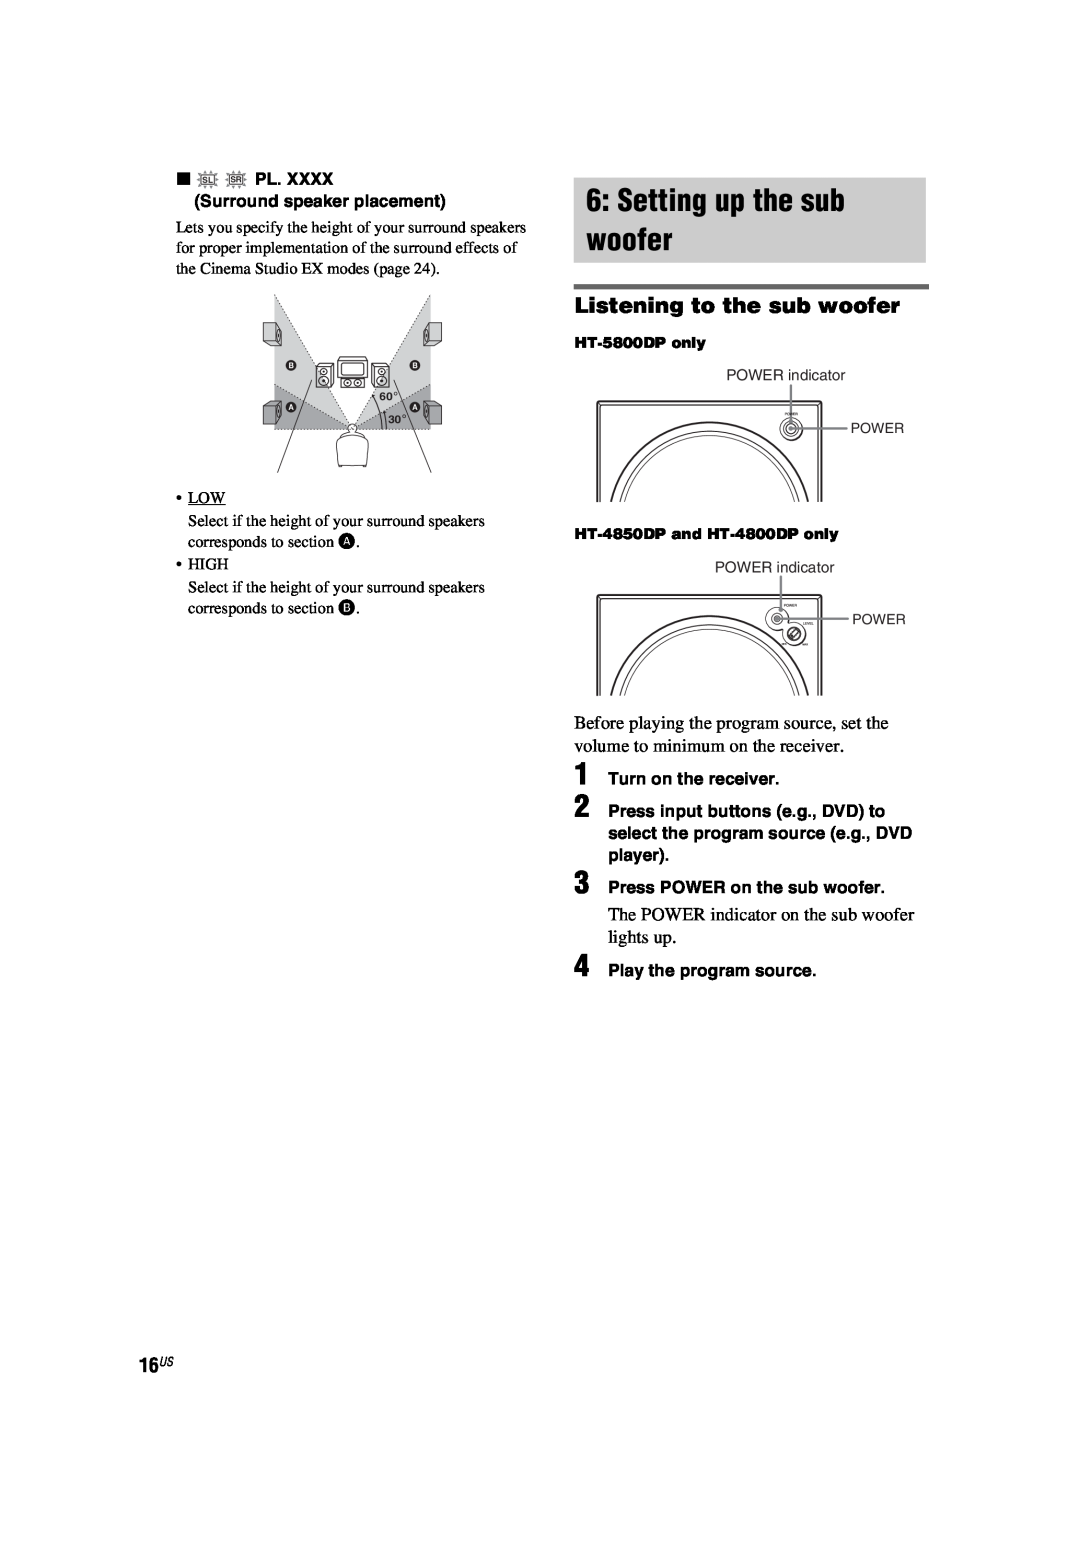 Sony HT-5800DP manual 6:Setting up the sub woofer, Listening to the sub woofer, 16US, xSLSRPL. Surround speaker placement 